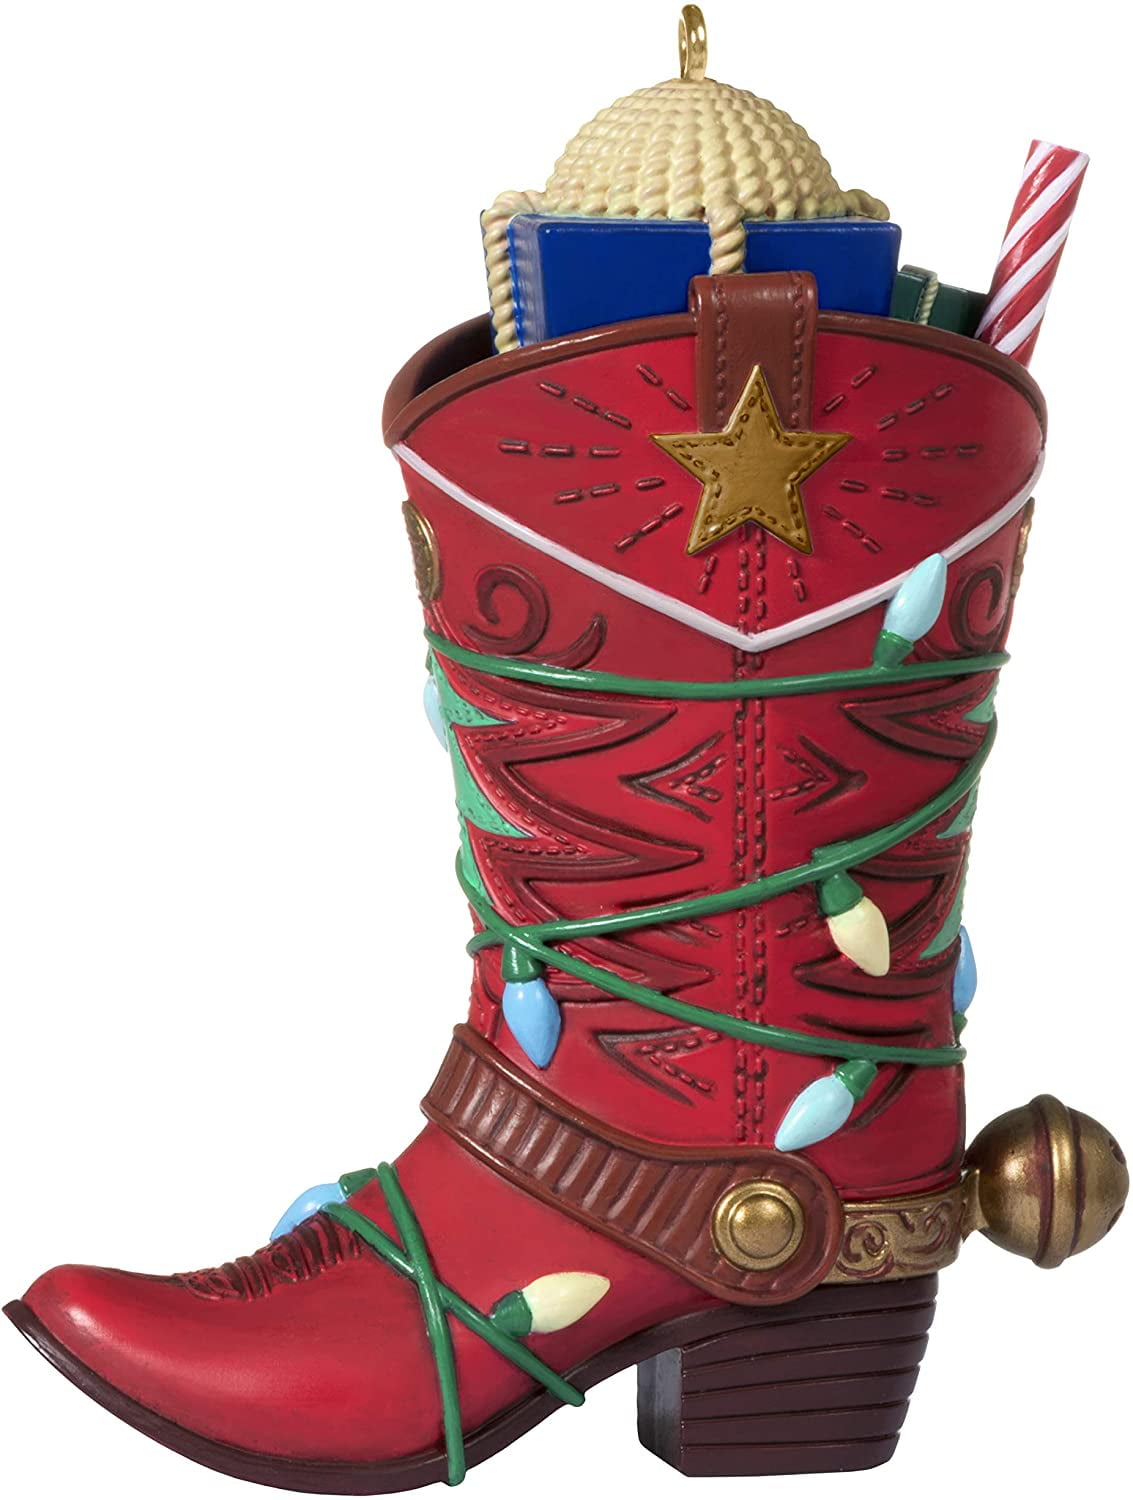 Metal Christmas cowboy boots ornament New by Round Top #C9076 